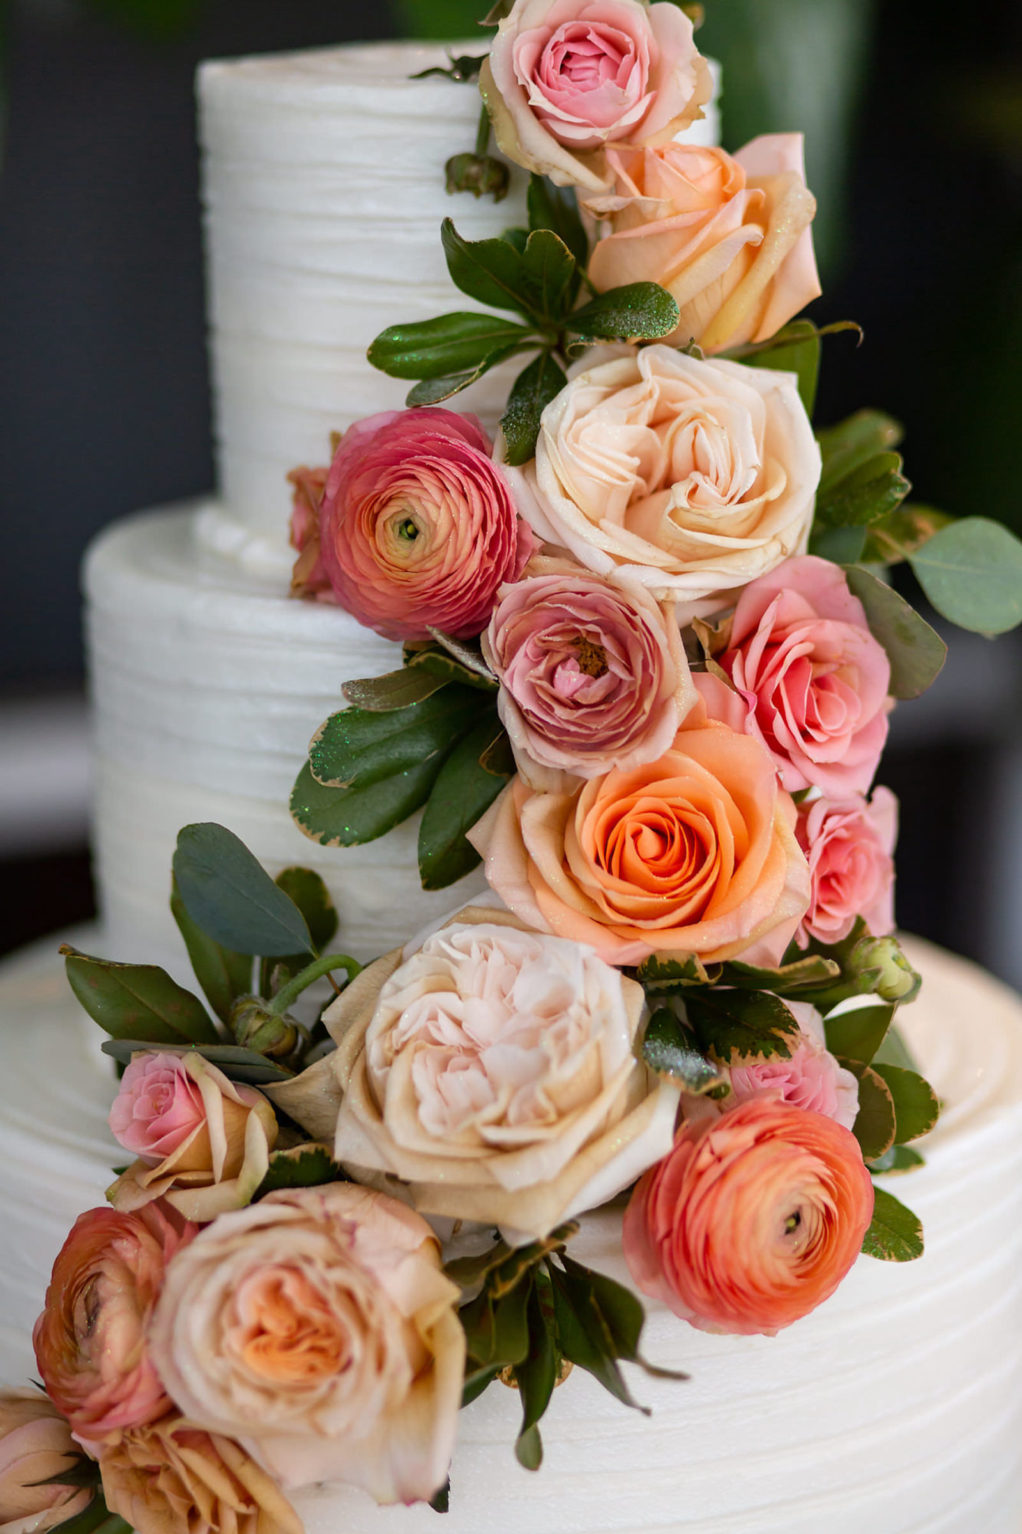 Three Tier Buttercream Striped Icing Wedding Cake with Fresh Flowers of Peach Roses and Coral Ranunculus and Greenery Cascading down the Side